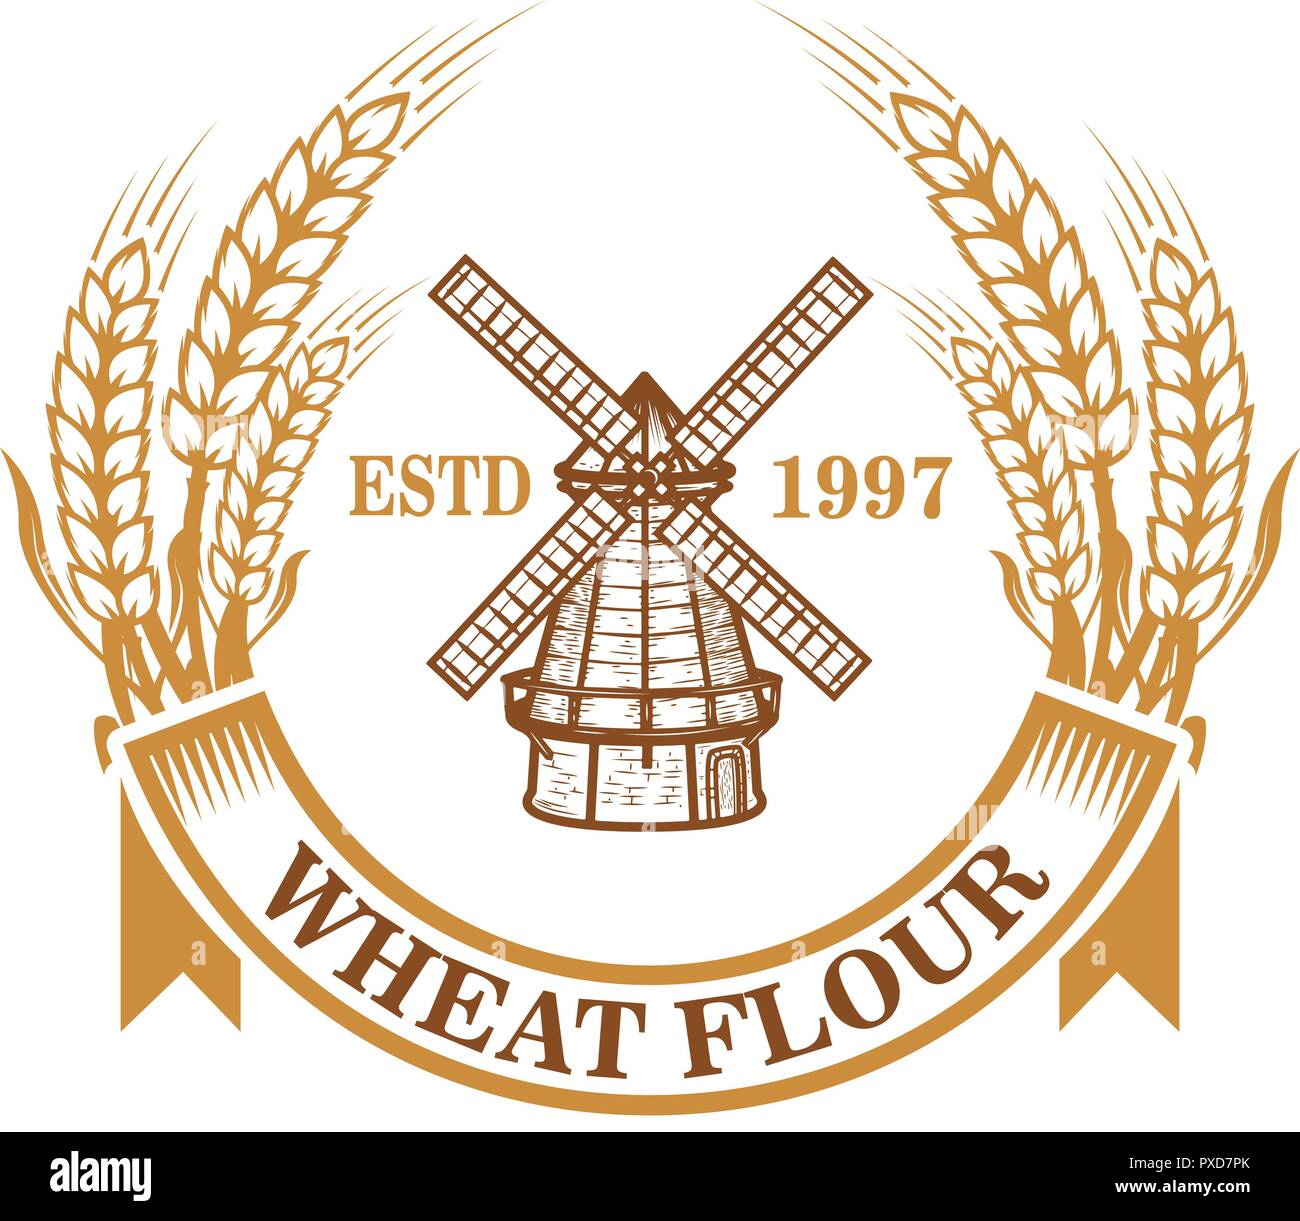 Wheat flour label template with wind mill. Design element for logo, emblem, sign, poster, t shirt. Vector illustration Stock Vector